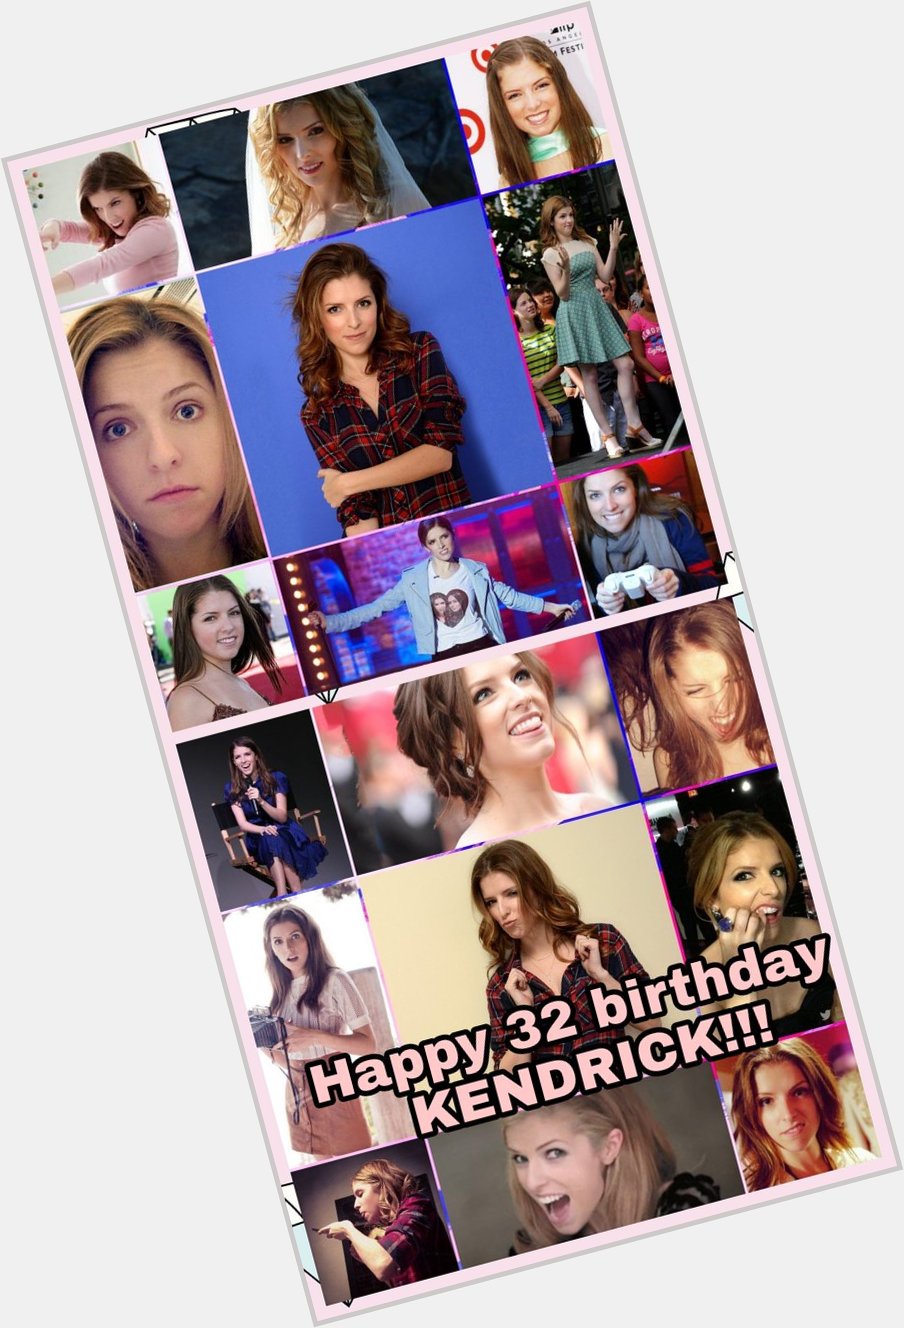  Happy 32 birthday Anna kendrick!! You are awesome.   